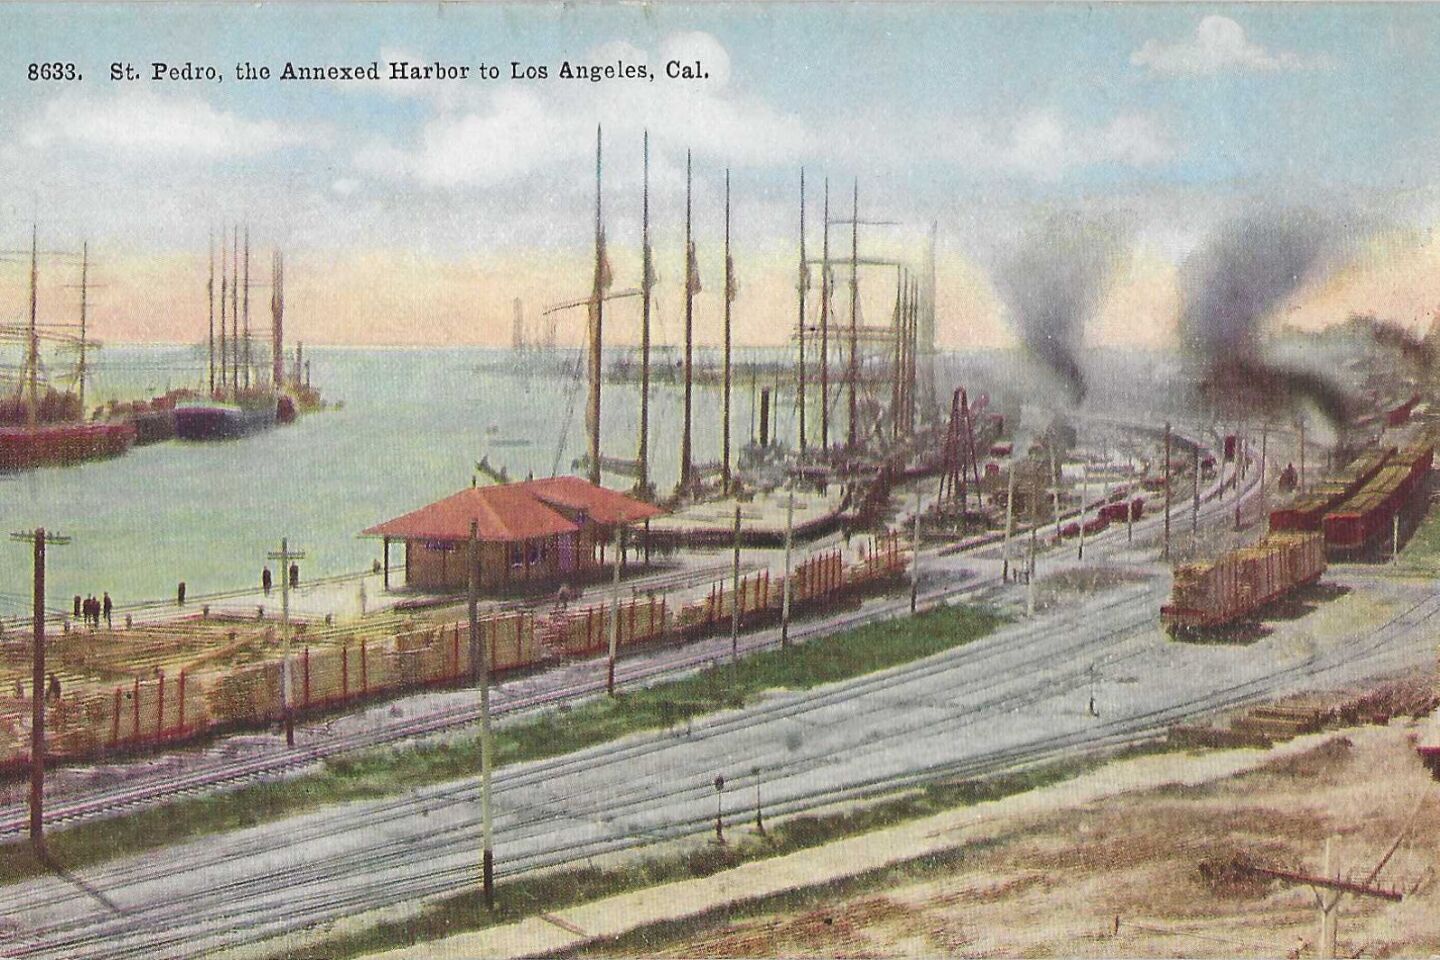 A vintage postcard reads "St. Pedro, the Annexed Harbor to Los Angeles, Cal."